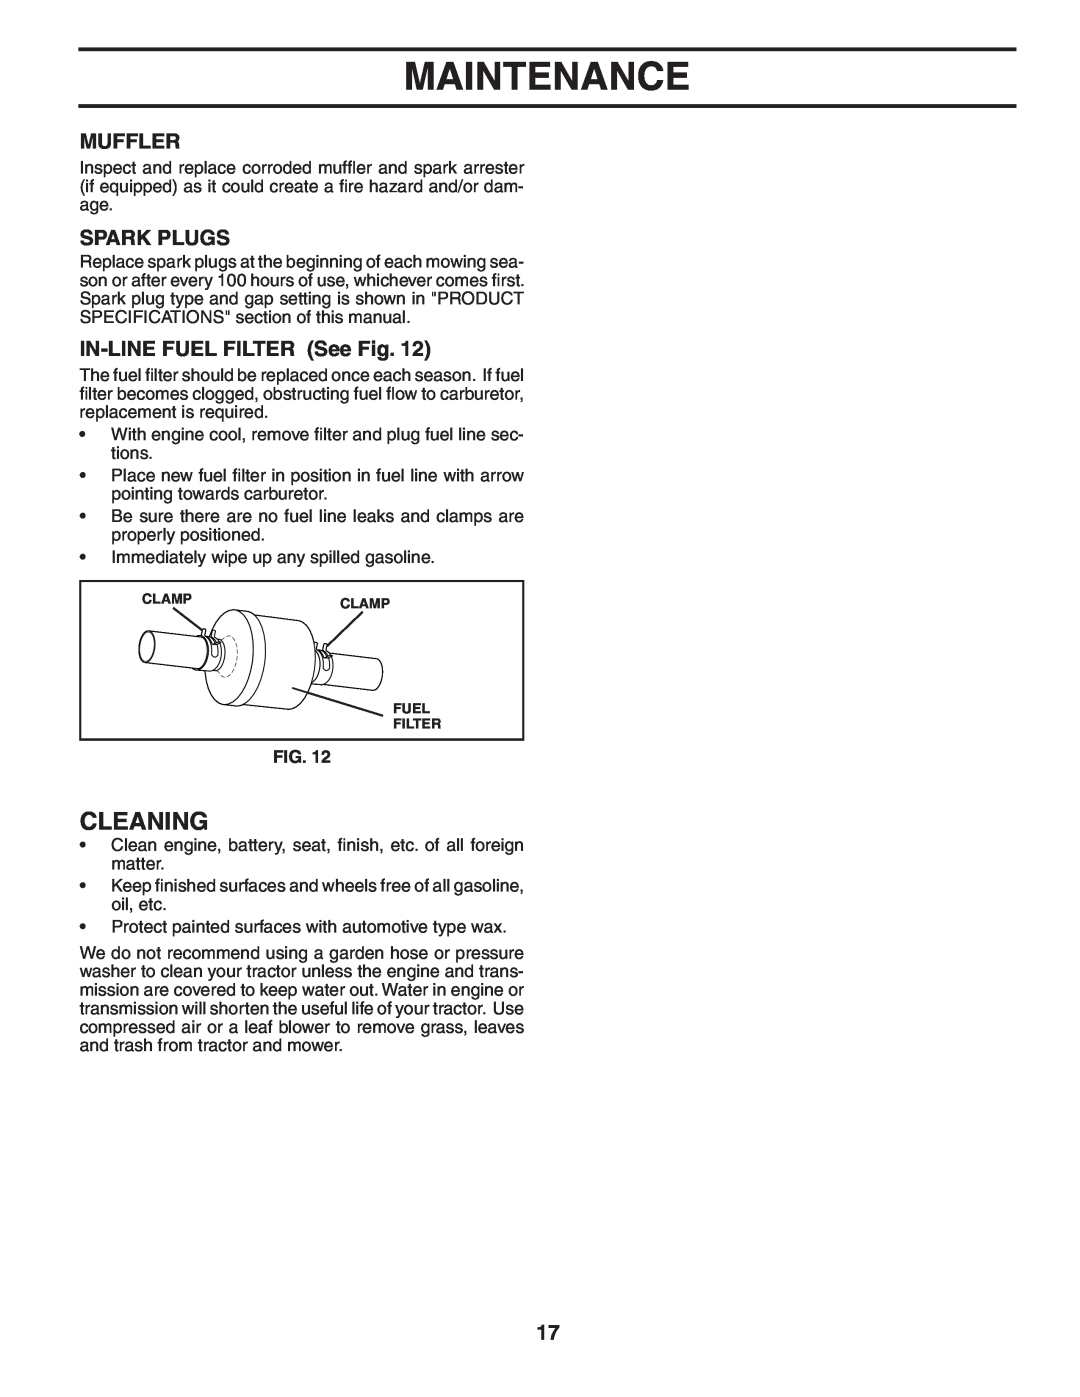 Weed Eater WET2242STD manual Cleaning, Muffler, Spark Plugs, IN-LINE FUEL FILTER See Fig, Maintenance 